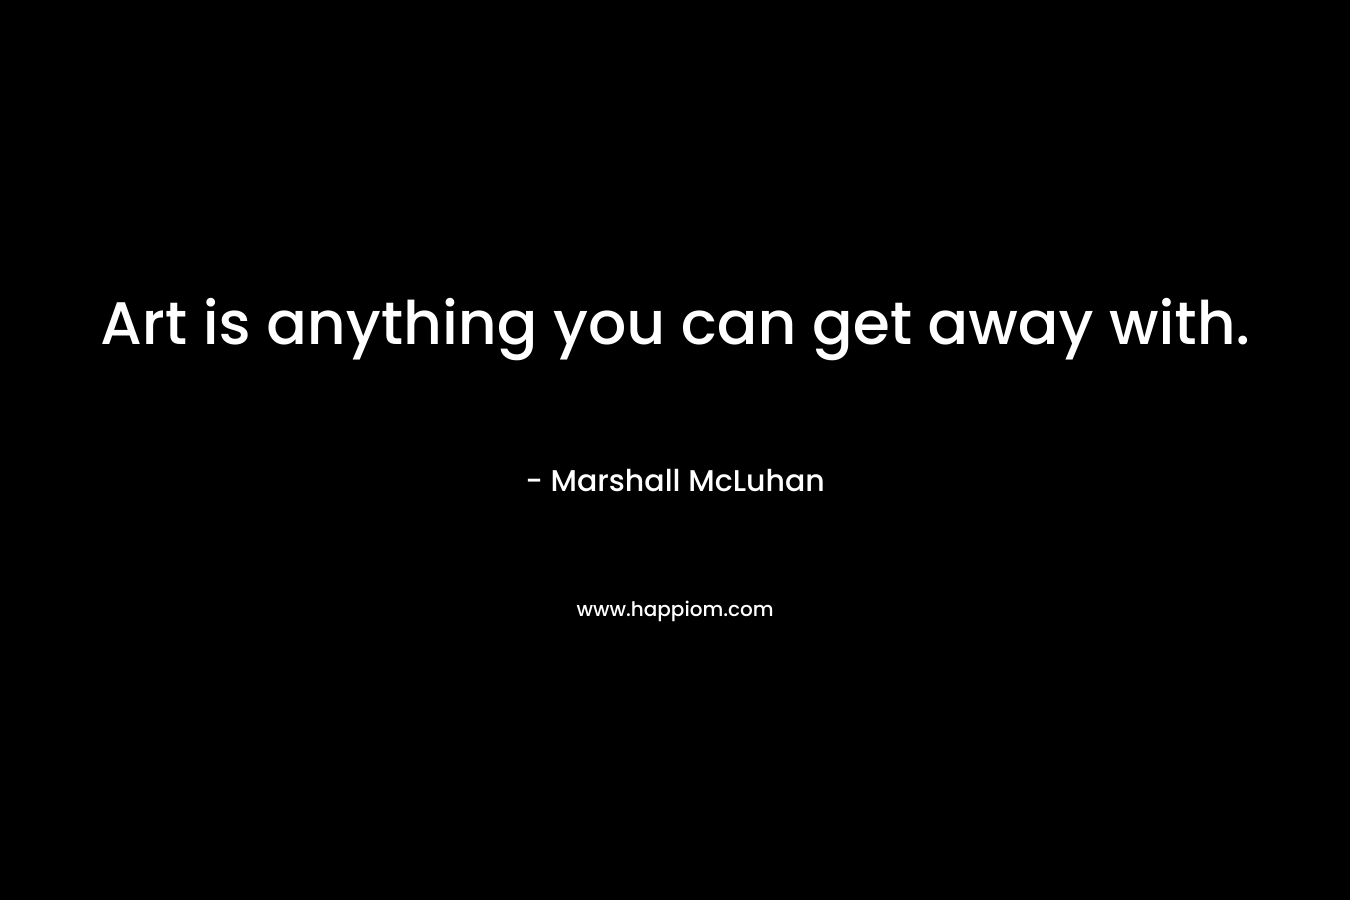 Art is anything you can get away with. – Marshall McLuhan